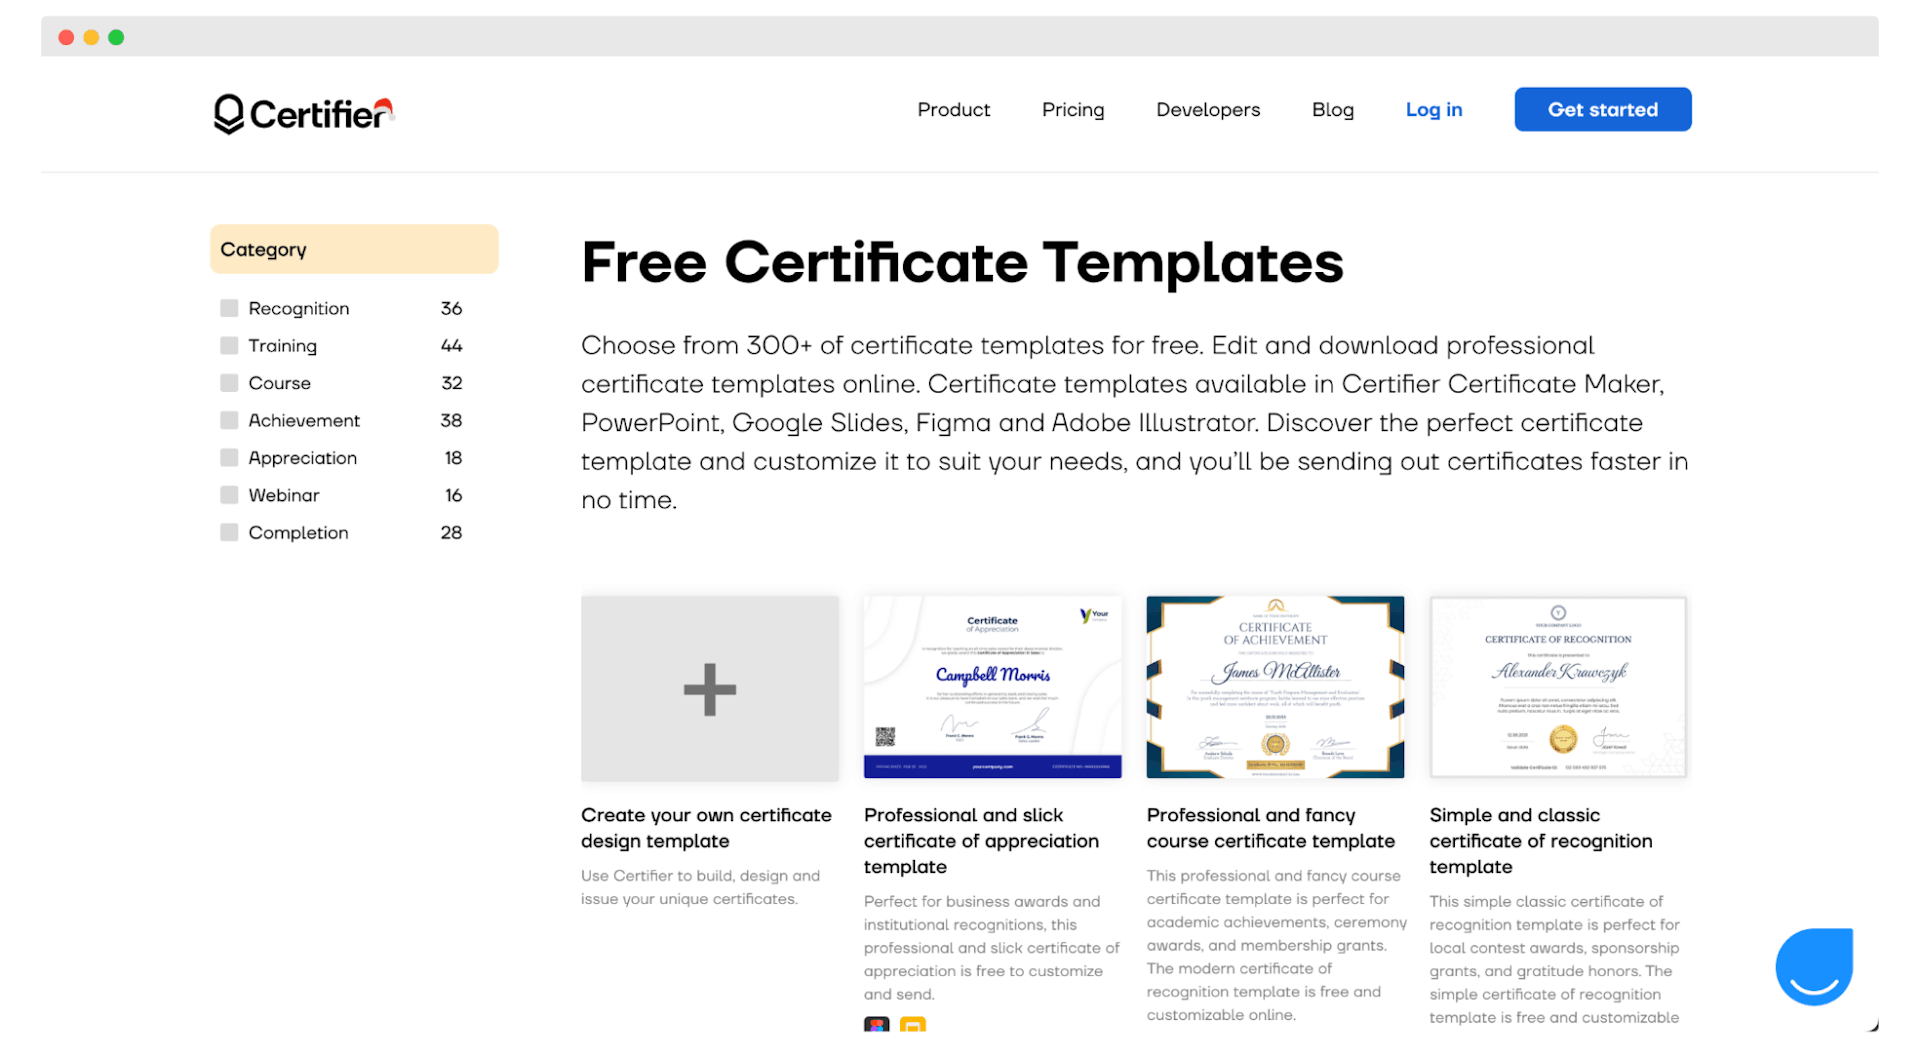 The library of free certificate templates available on Certifier, perfect for online trainings.